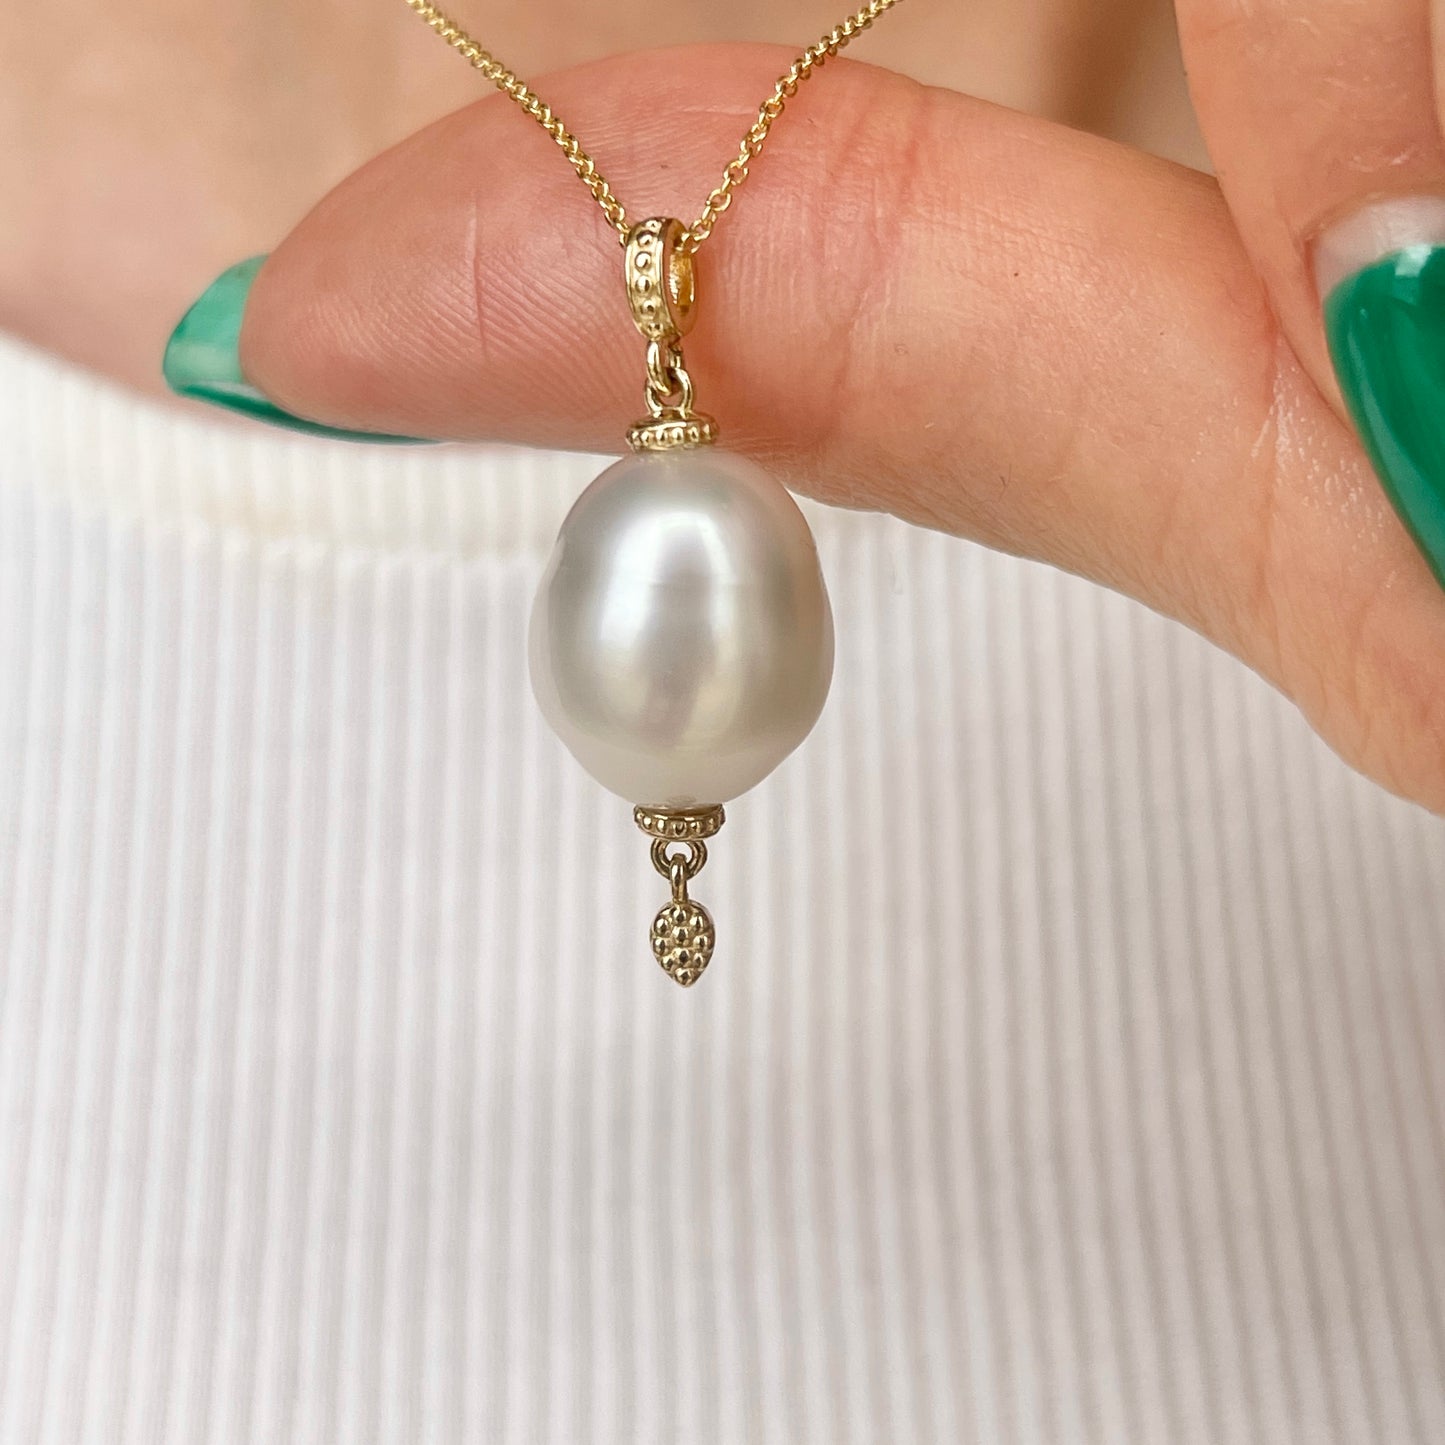 14KT Yellow Gold 11mm Paspaley South Sea Pearl Ornate Pendant Necklace